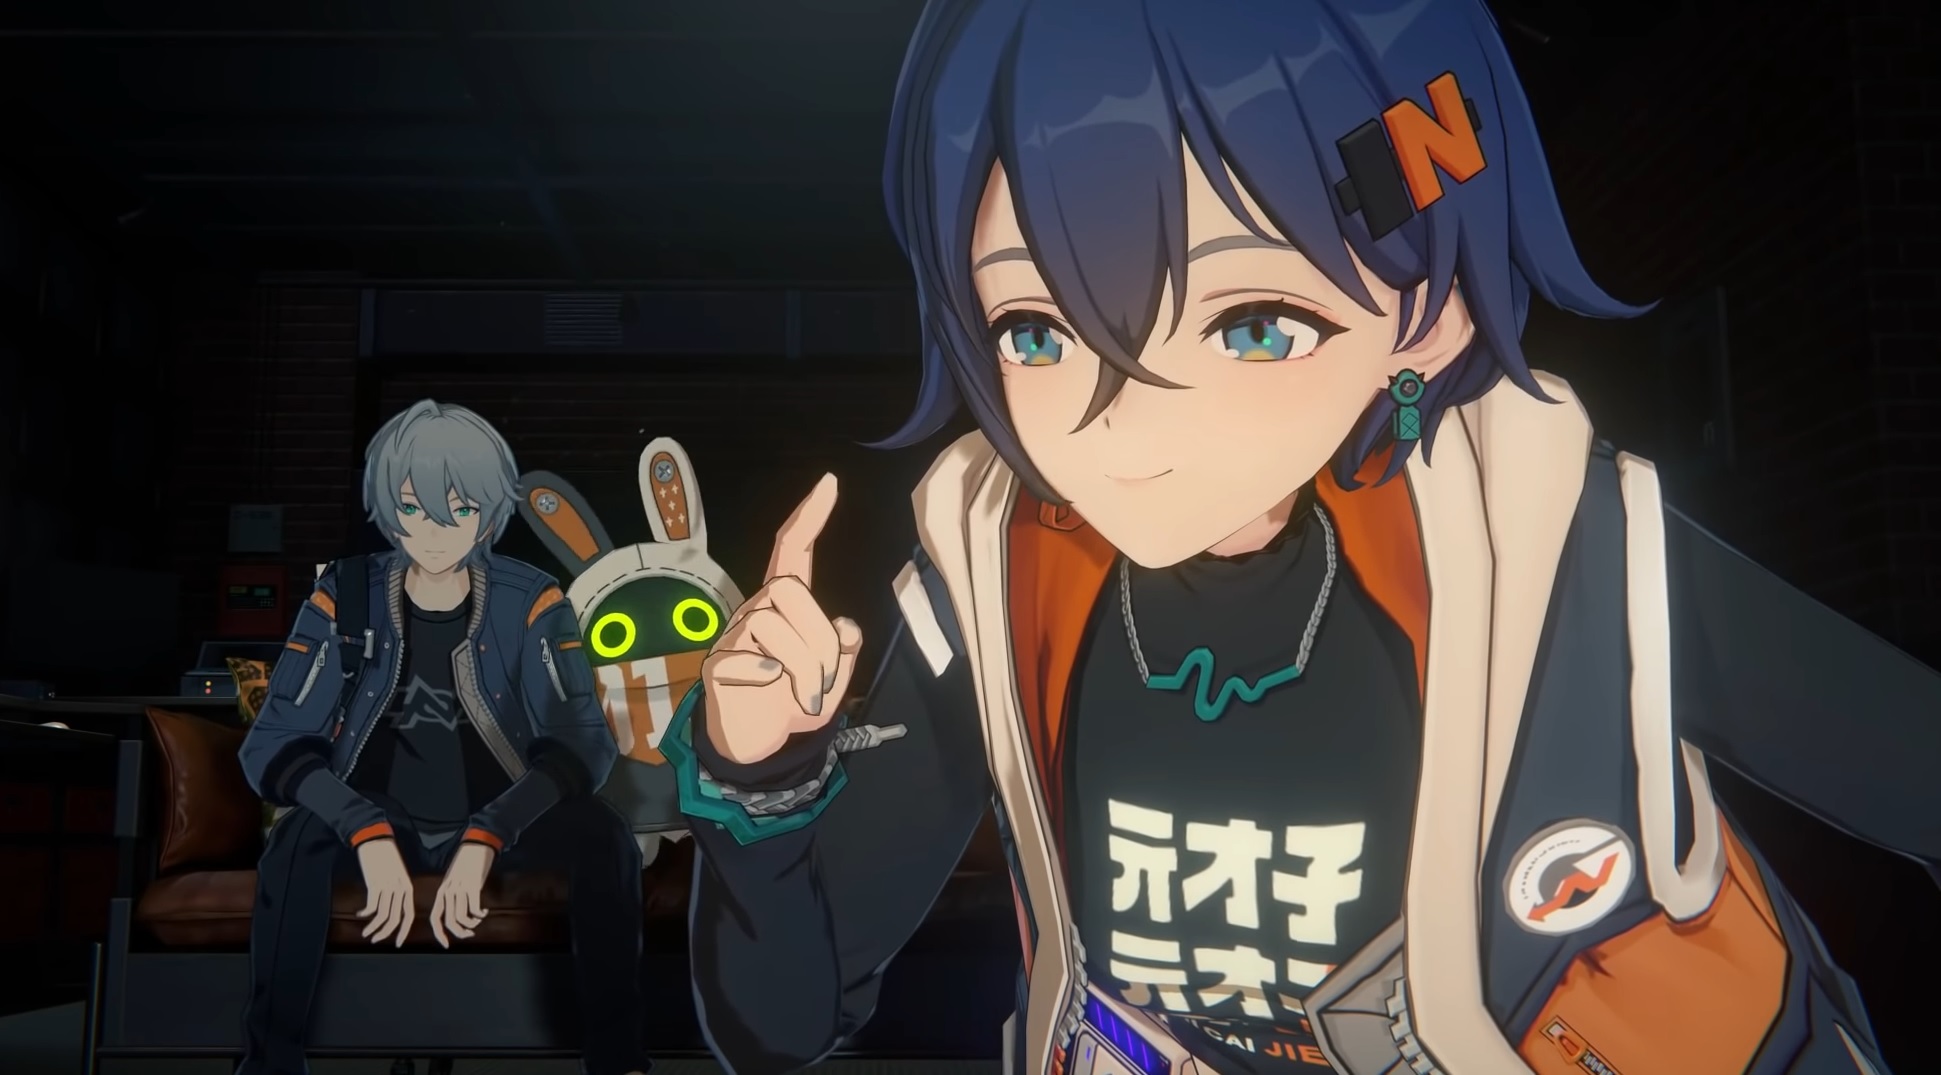 Zenless Zone Zero - A girl with short blue hair and a jacket kneels near the camera, while a boy with short blue hair sits in the background next to a stuffed bunny creature with green eyes.